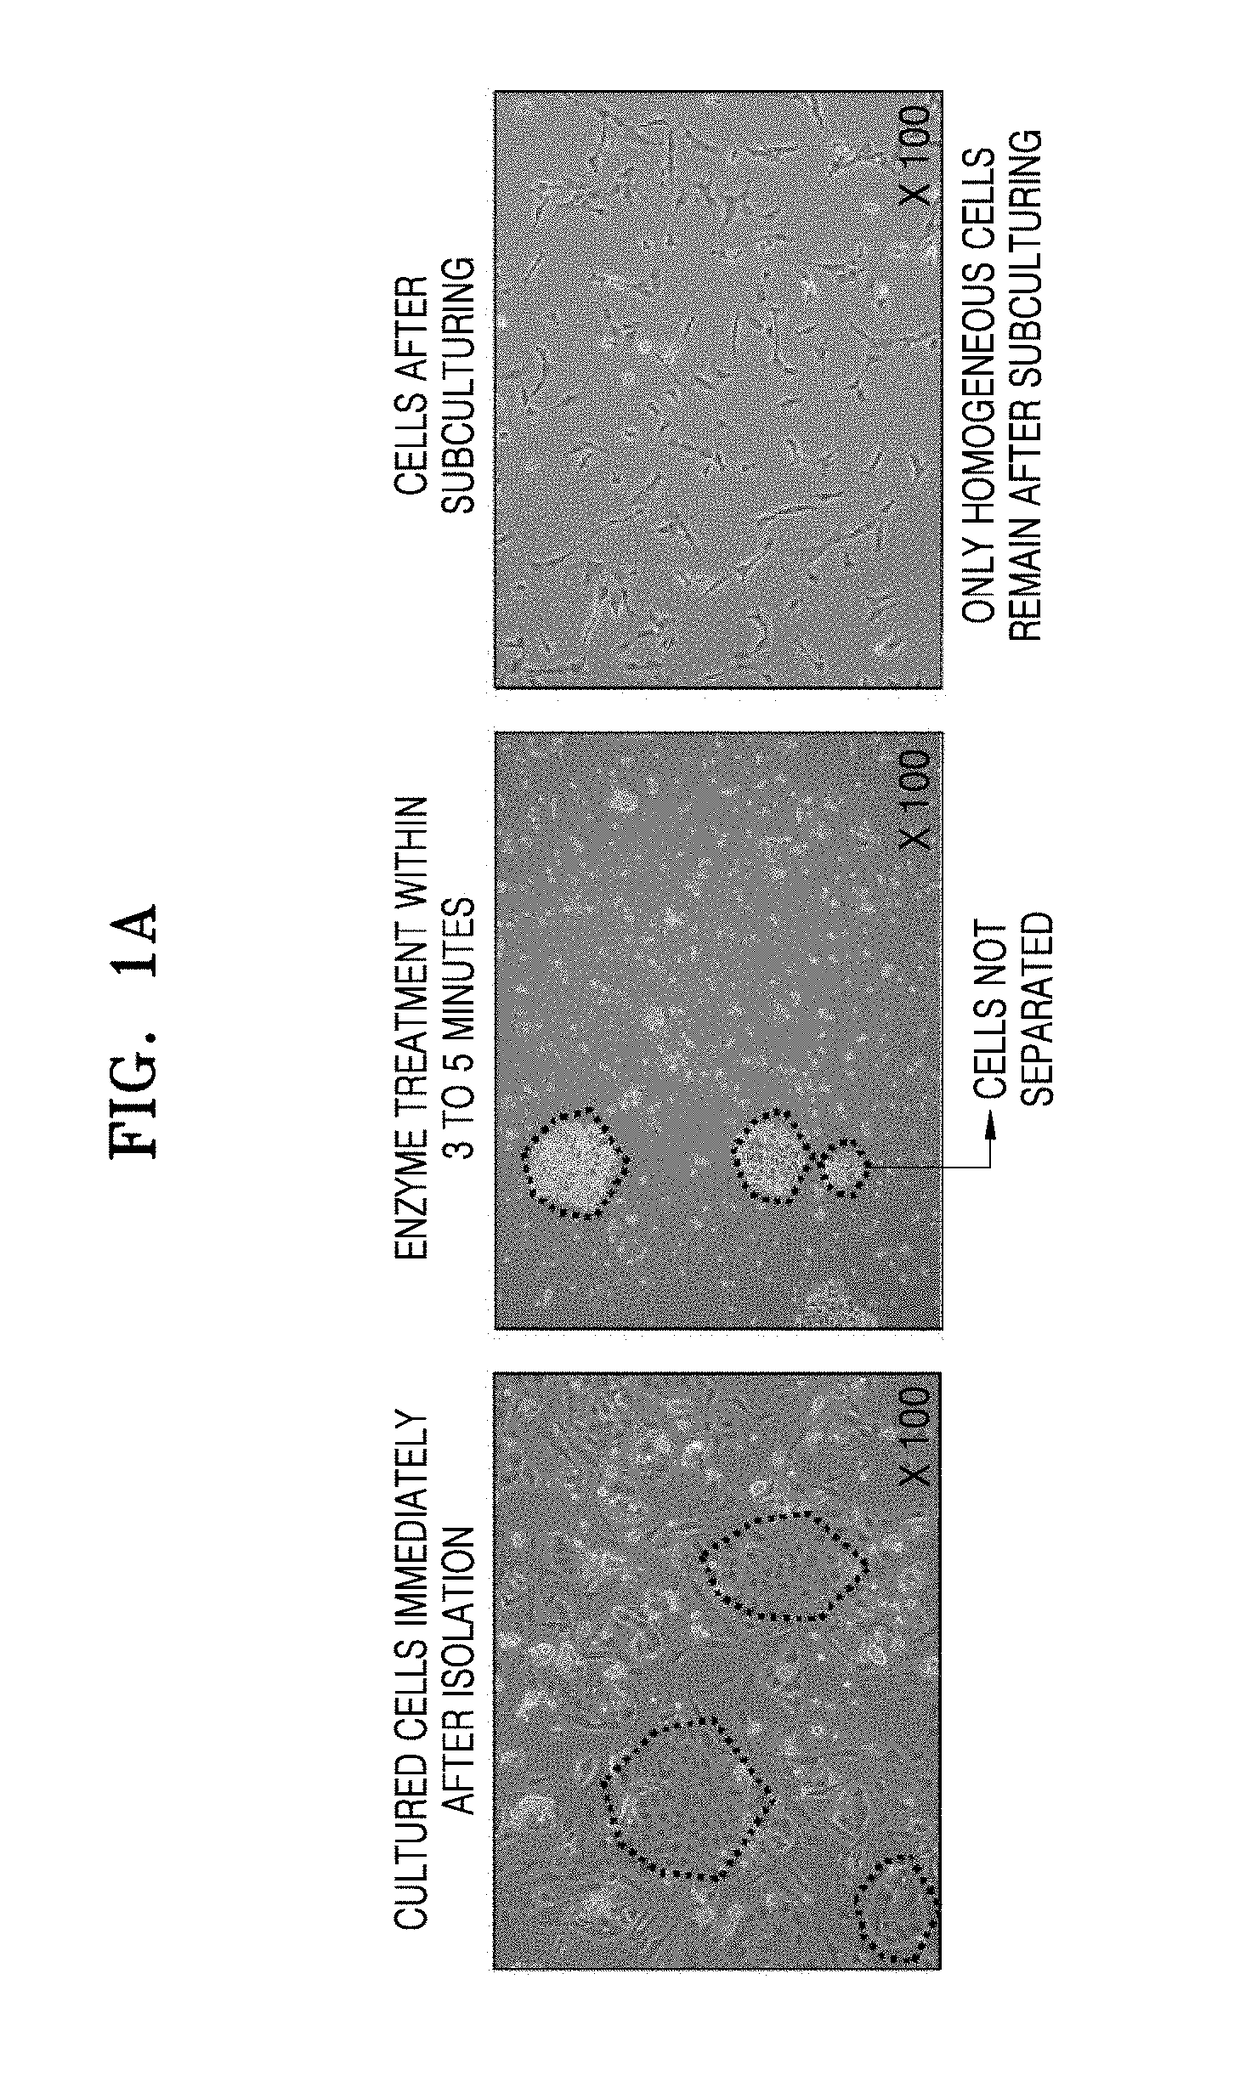 Improved postnatal adherent cells and preparation method therefor